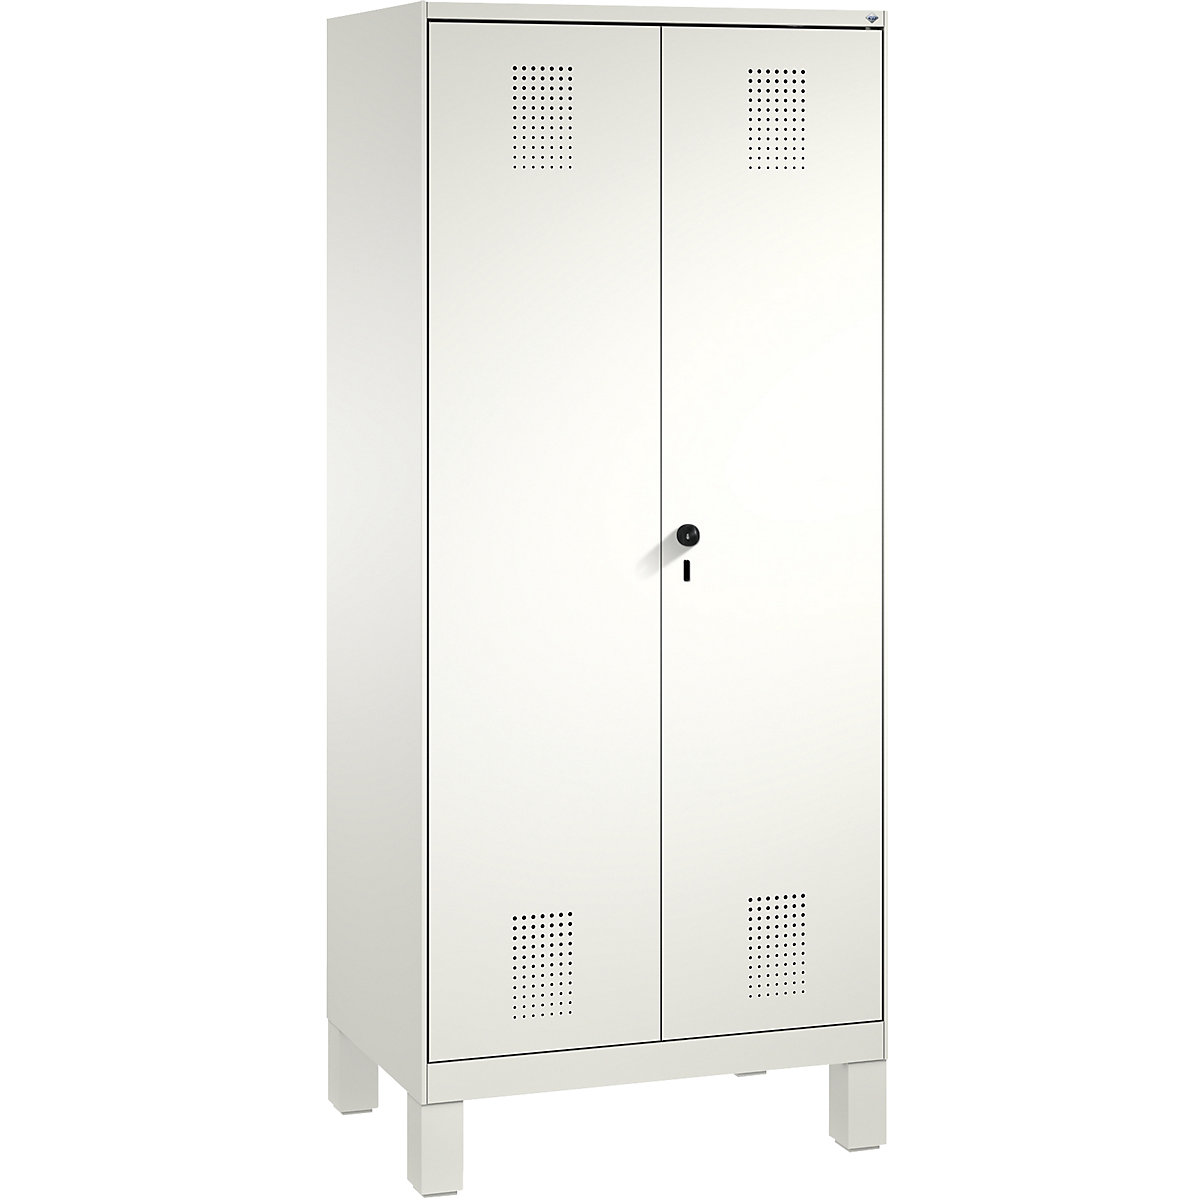 EVOLO storage cupboard, doors close in the middle, with feet – C+P, 2 compartments, 8 shelves, compartment width 400 mm, traffic white / traffic white-14